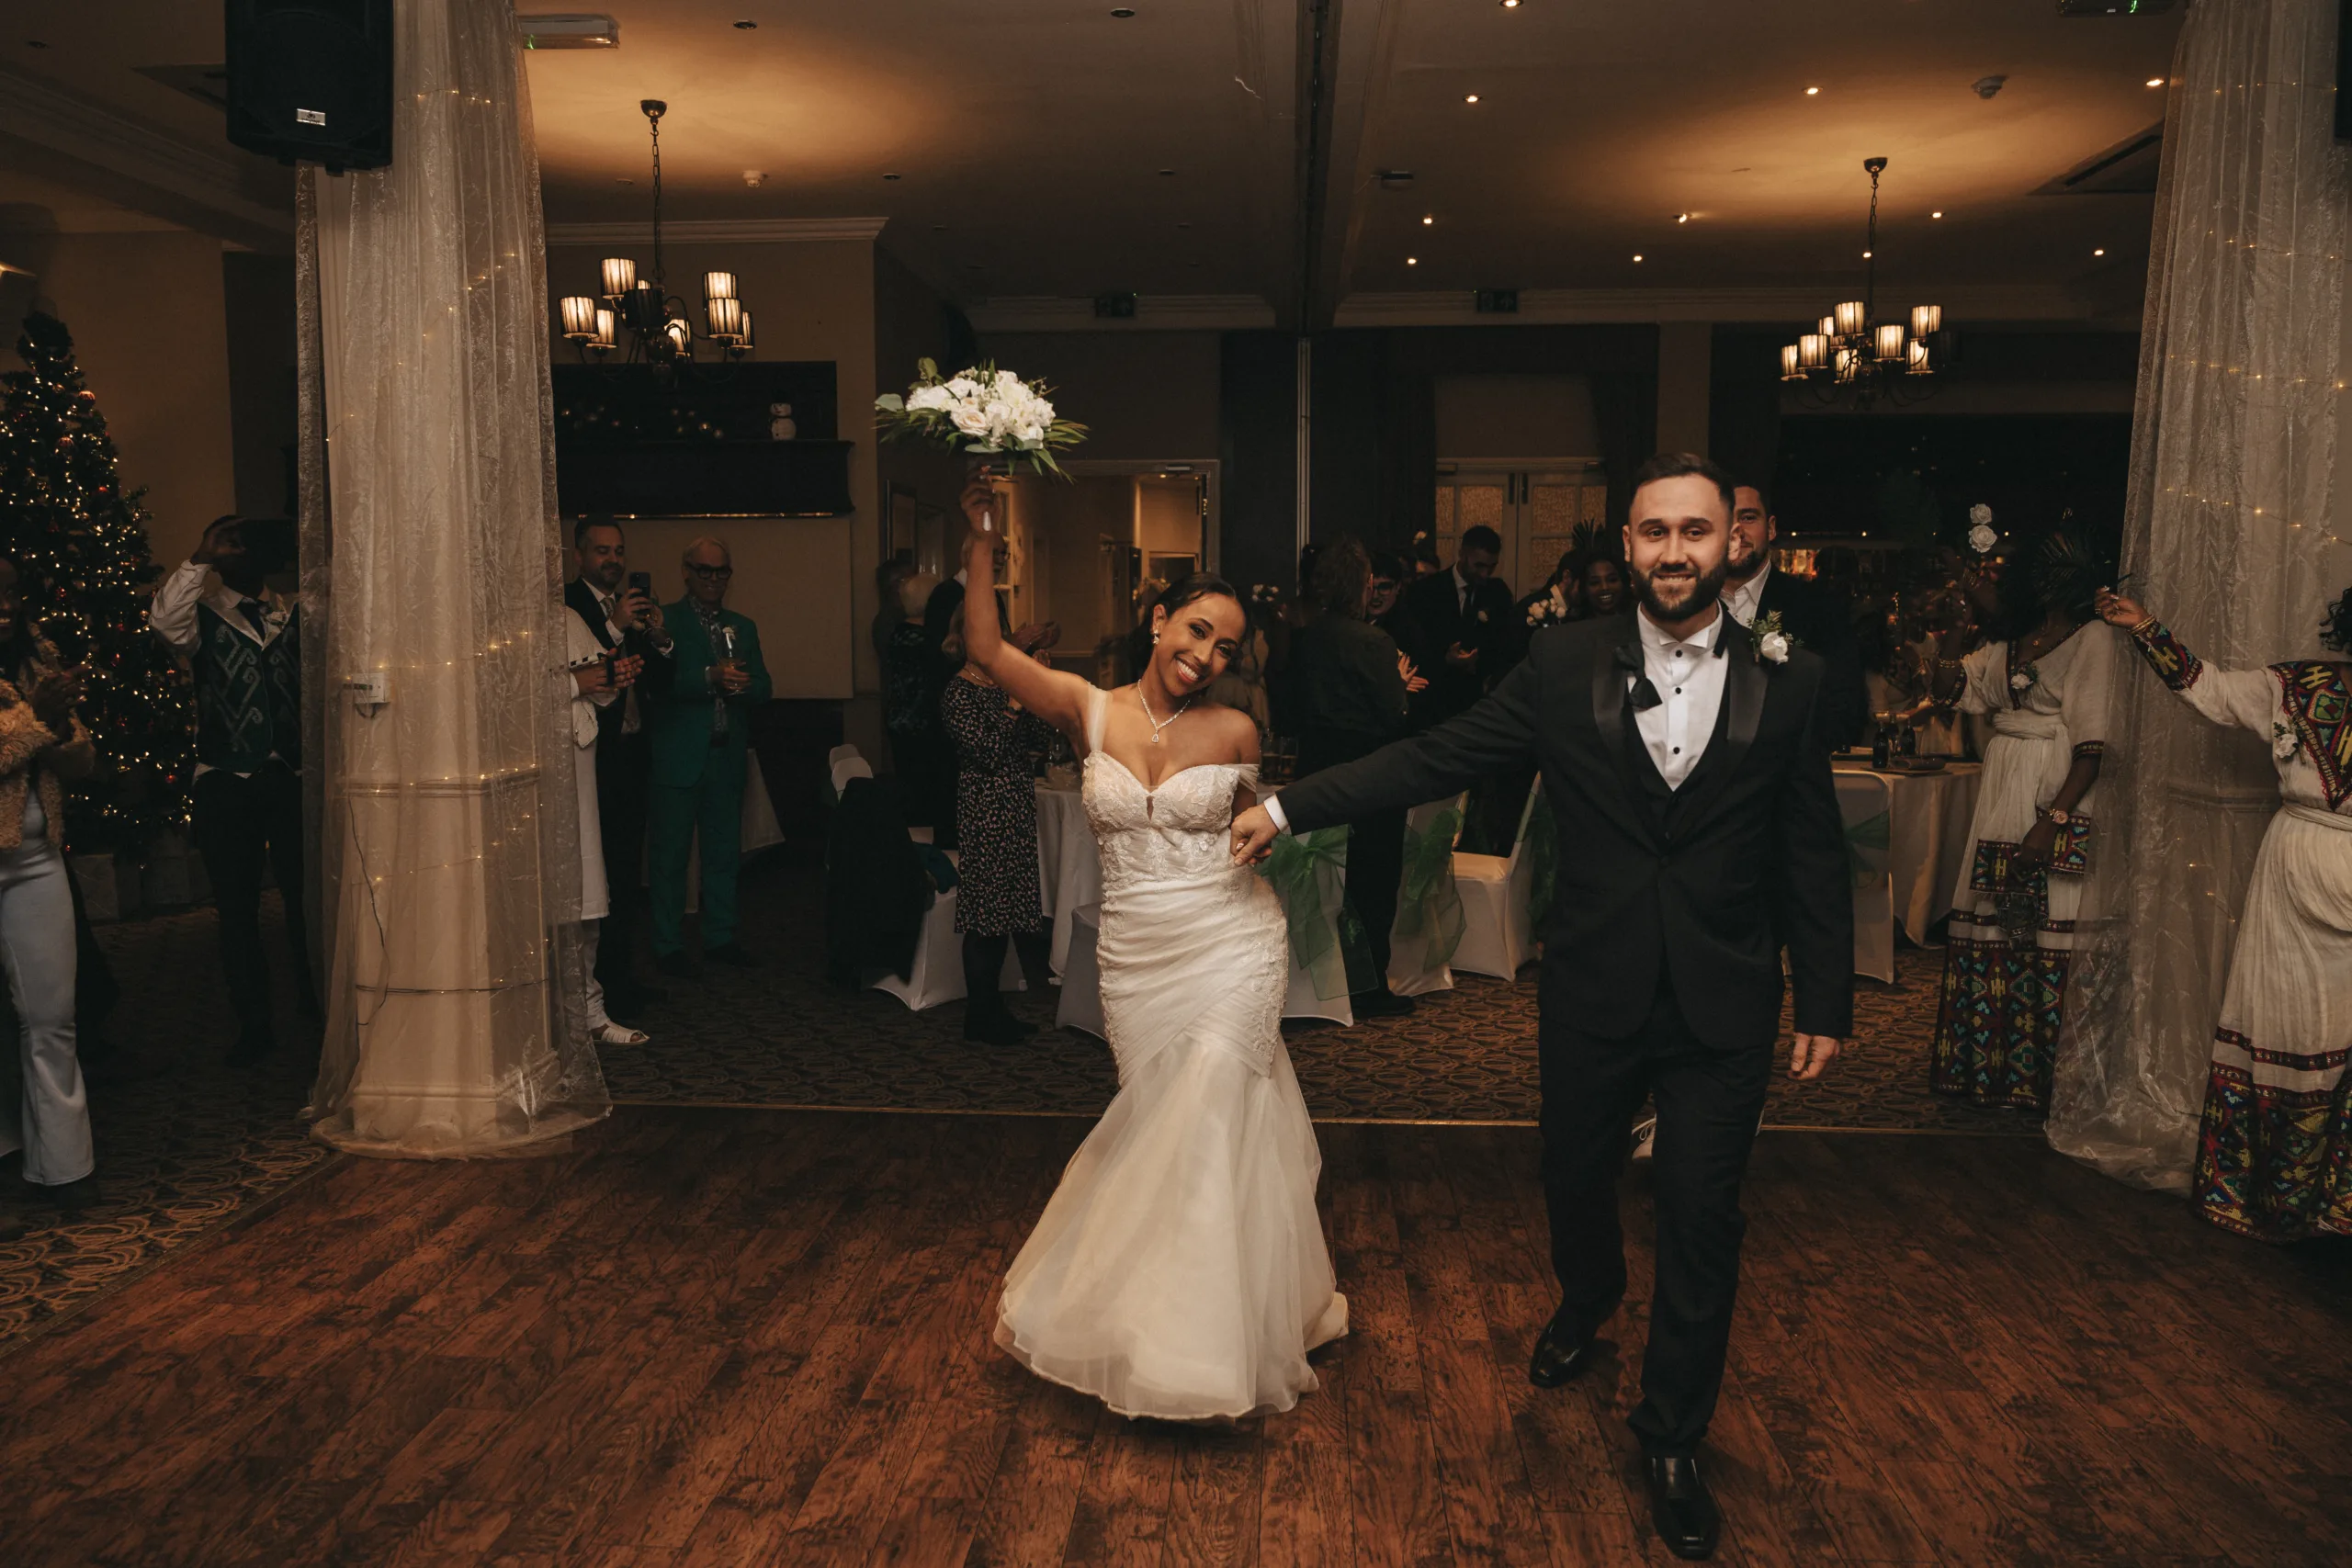 A bride and groom dancing on their wedding day in Lincolnshire.